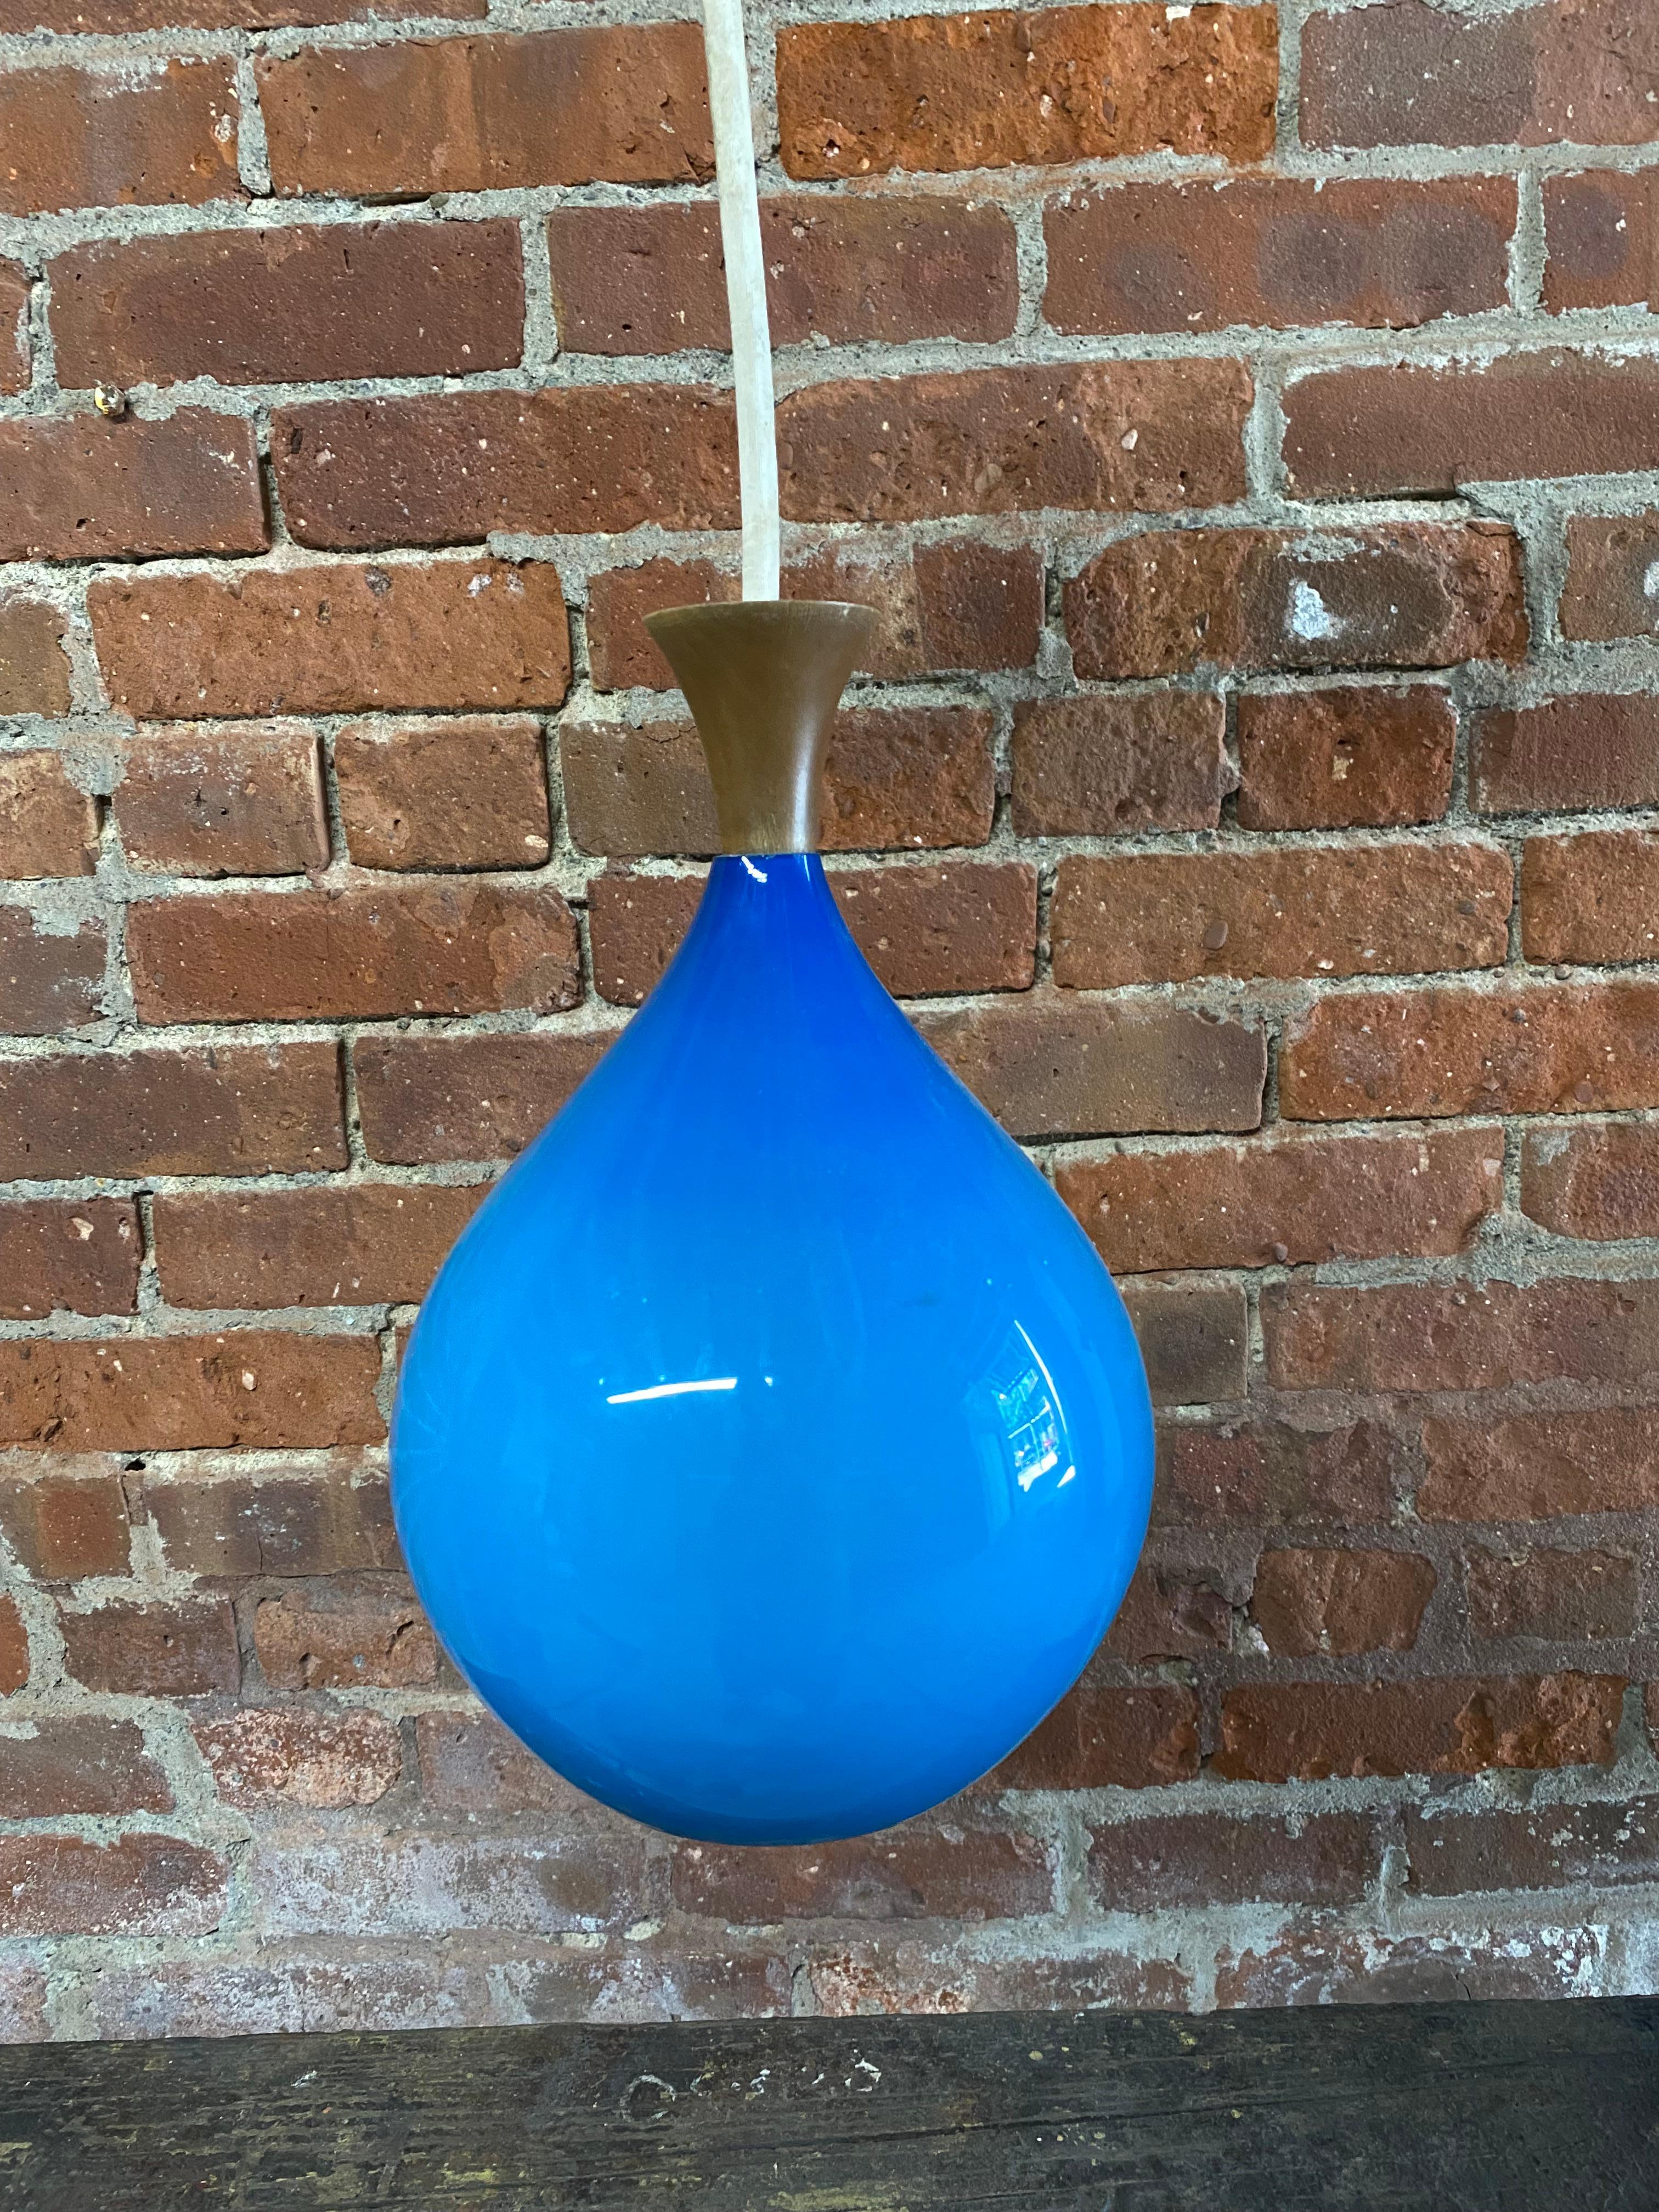 Sky blue and white cased glass hanging light fixture with wood finial. The bulb socket bares the Halcolite label. Circa 1960. Halcolite was a New York City importer of fine glass lighting amongst other lighting choices in the 1950s -70s. Good